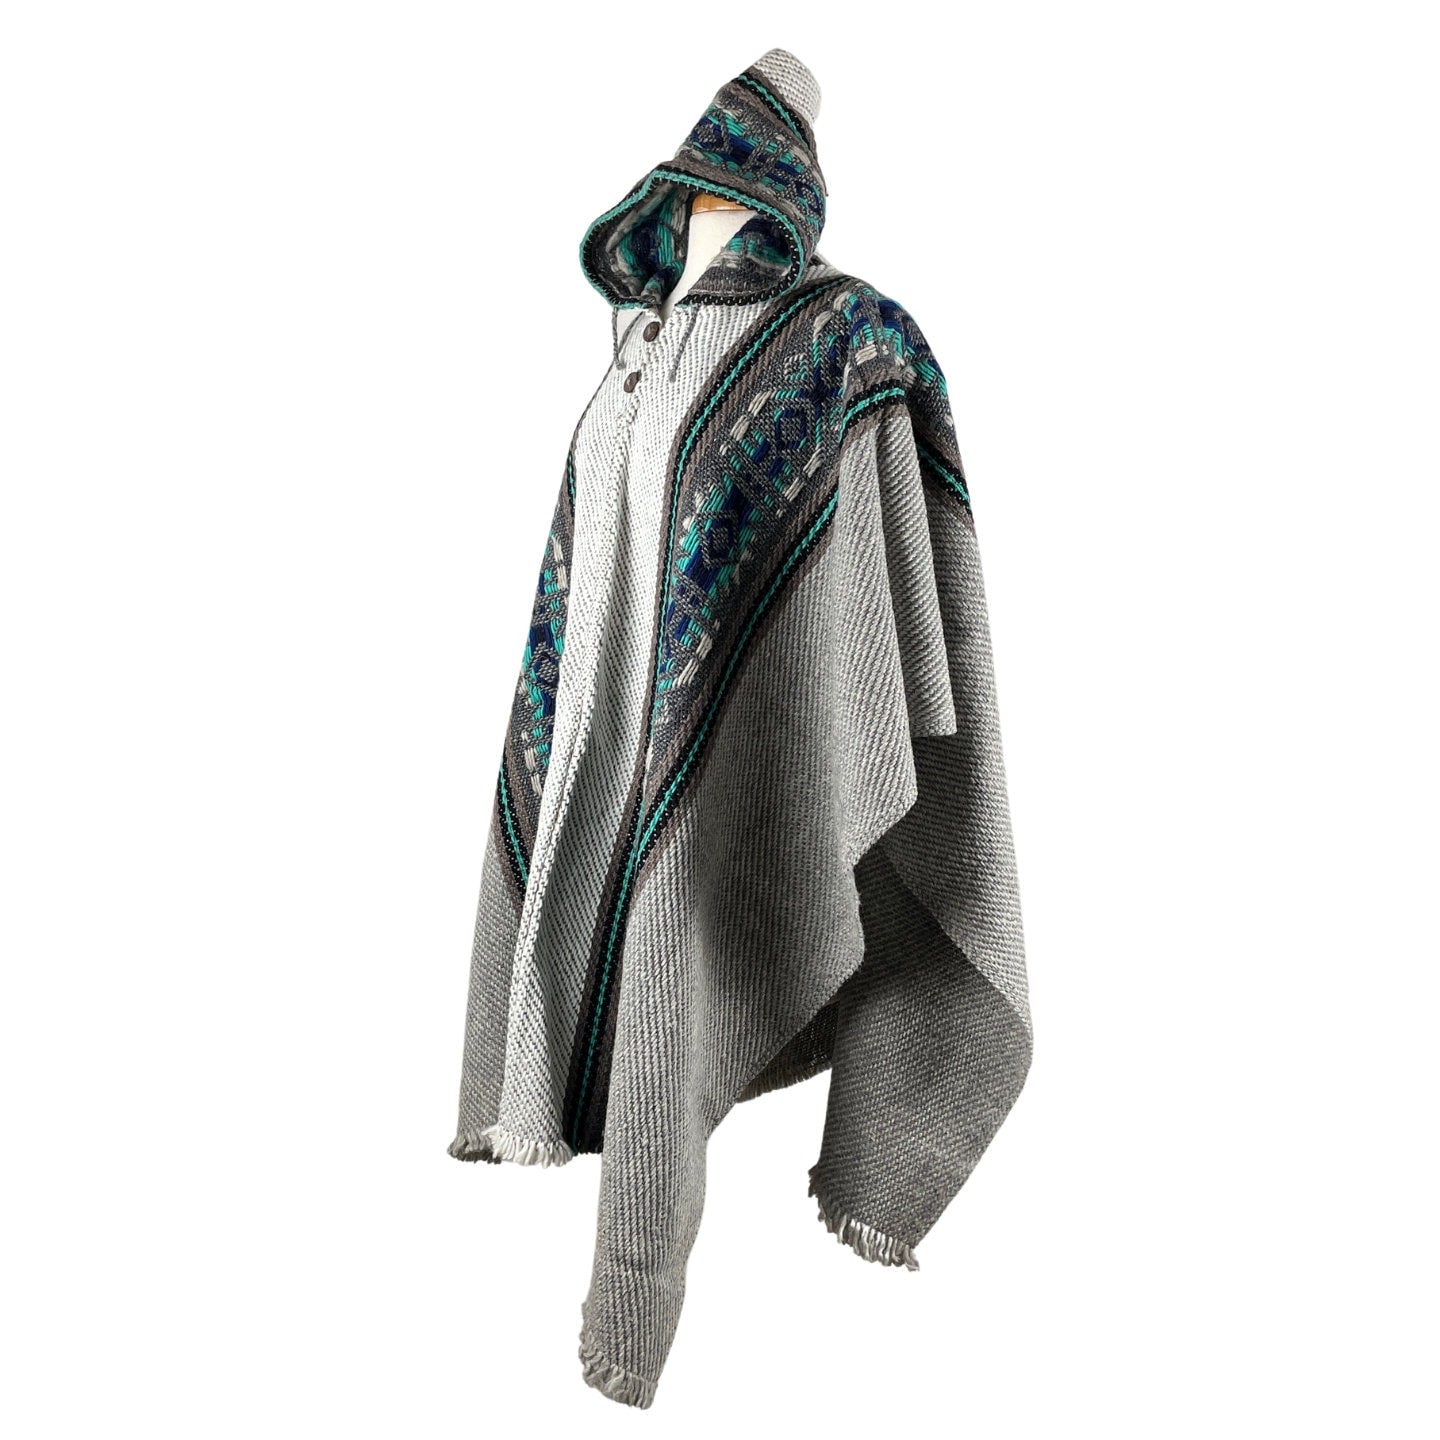 Weighted Hippie Hooded Sheep Wool Poncho | Silver Gray Turquoise